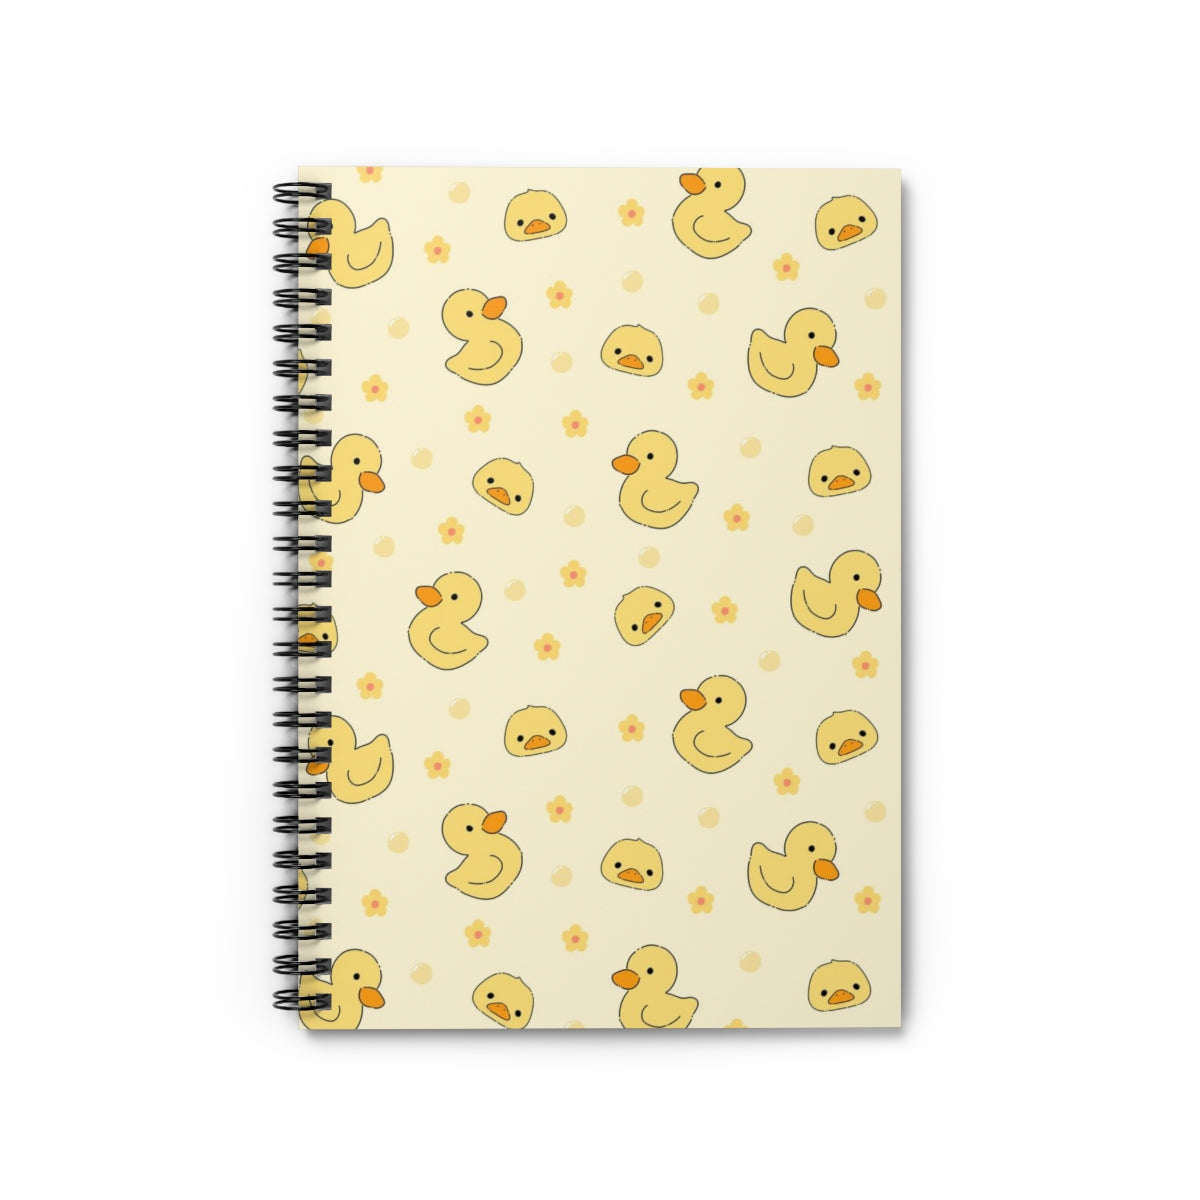 Cute duck Spiral Notebook, Yellow Animal Pattern Design Journal Traveler Notepad Ruled Line Book Paper Pad Work Aesthetic Gift Starcove Fashion